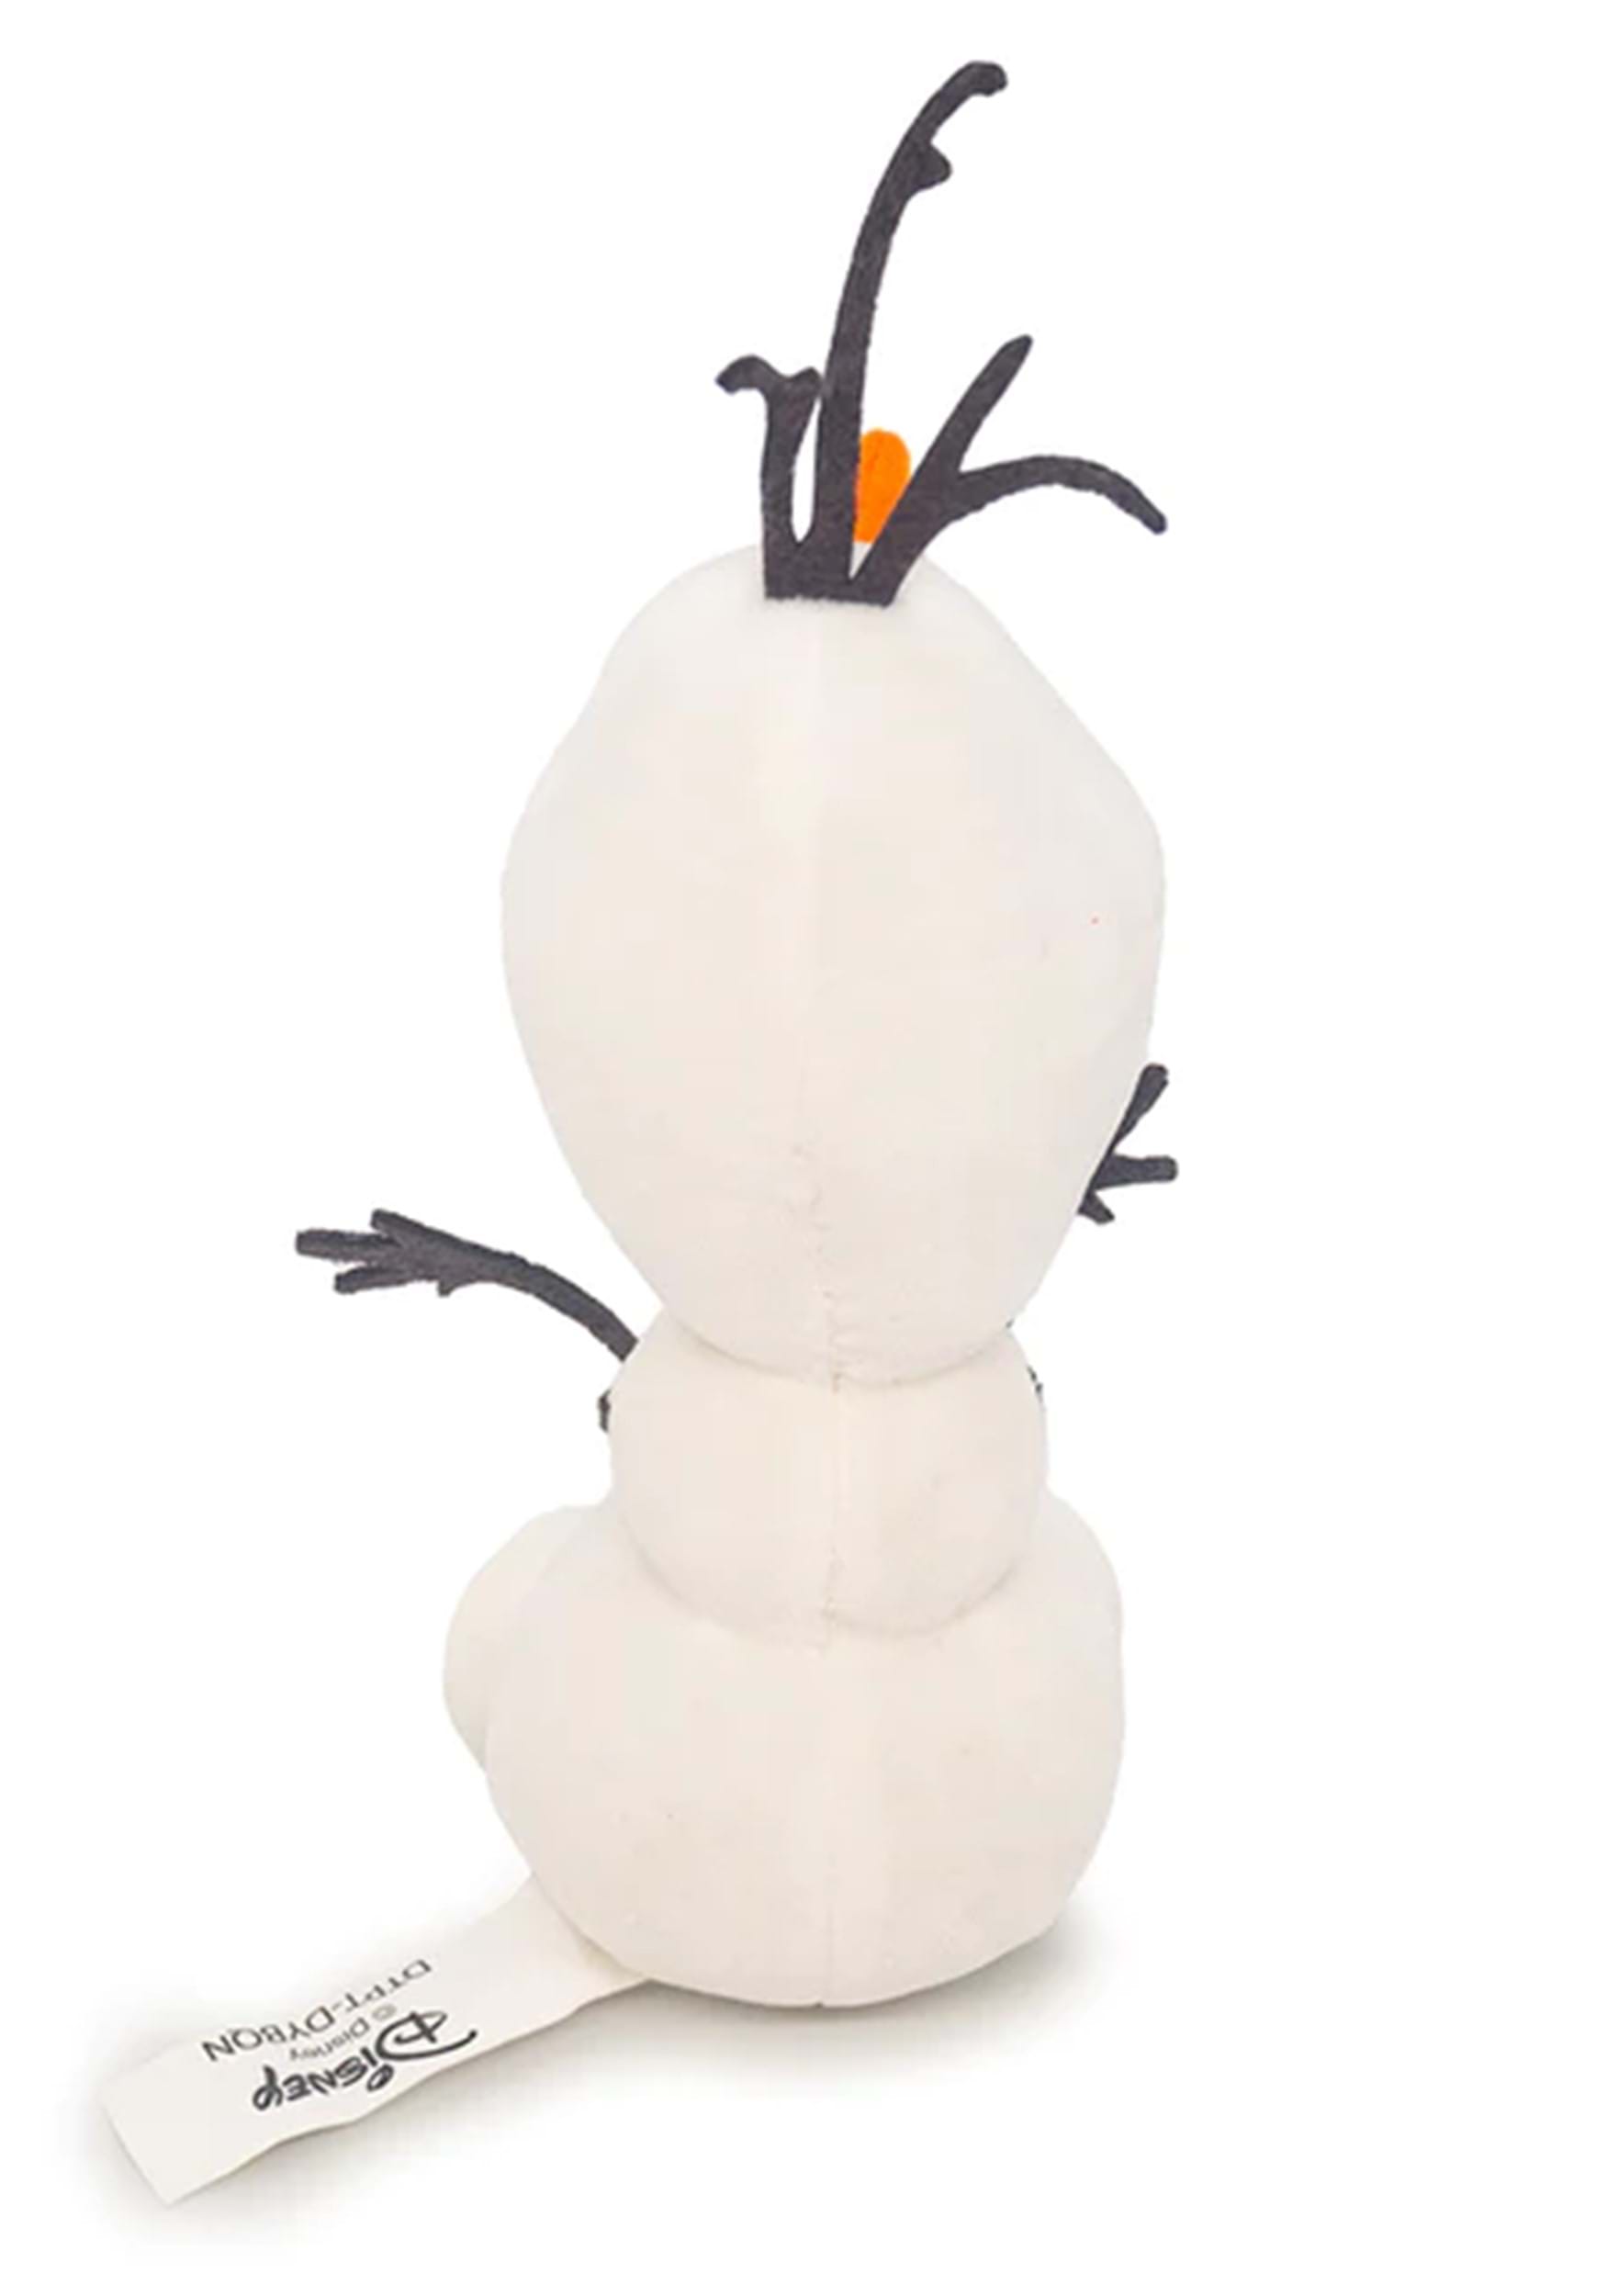 https://images.fun.com/products/90086/2-1-258004/frozen-olaf-squeaker-plush-dog-toy-alt-2.jpg